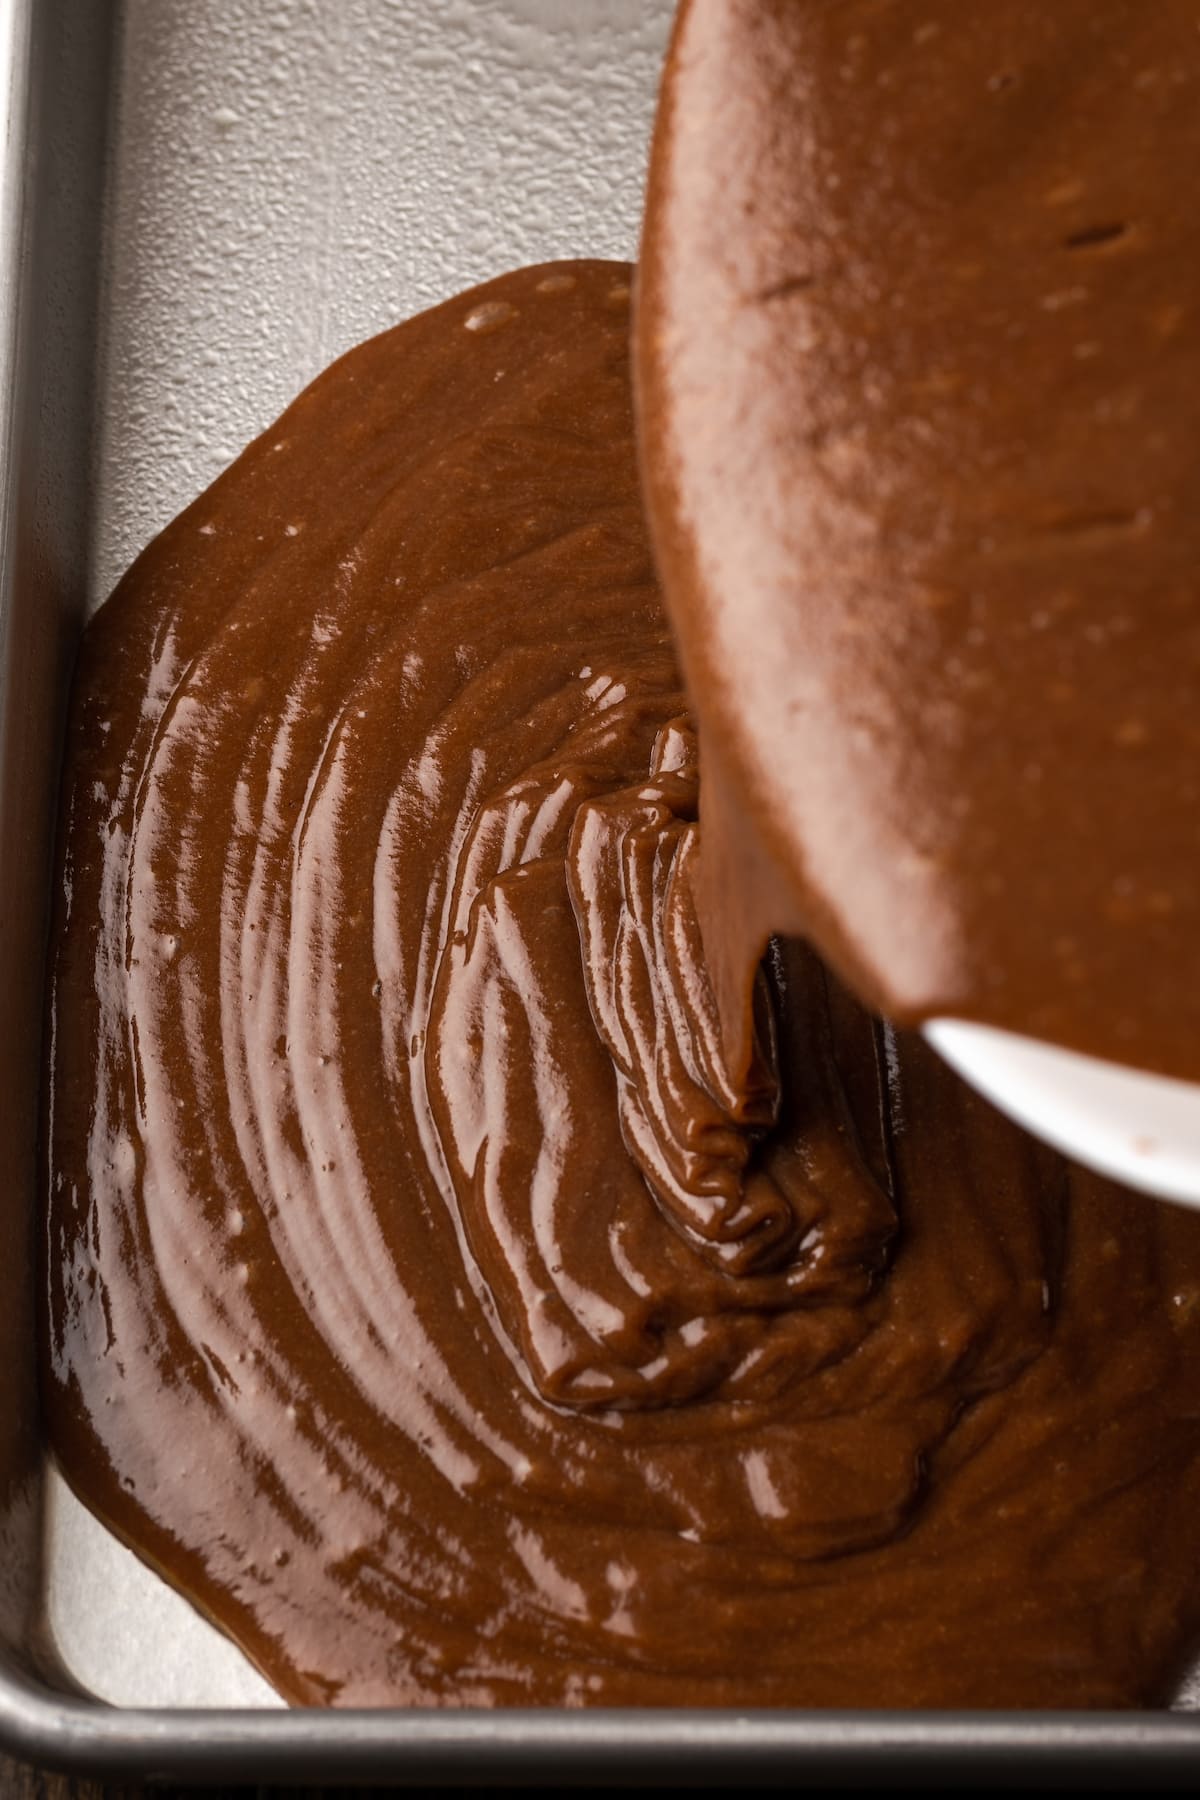 Chocolate cake batter is poured into a sheet pan.